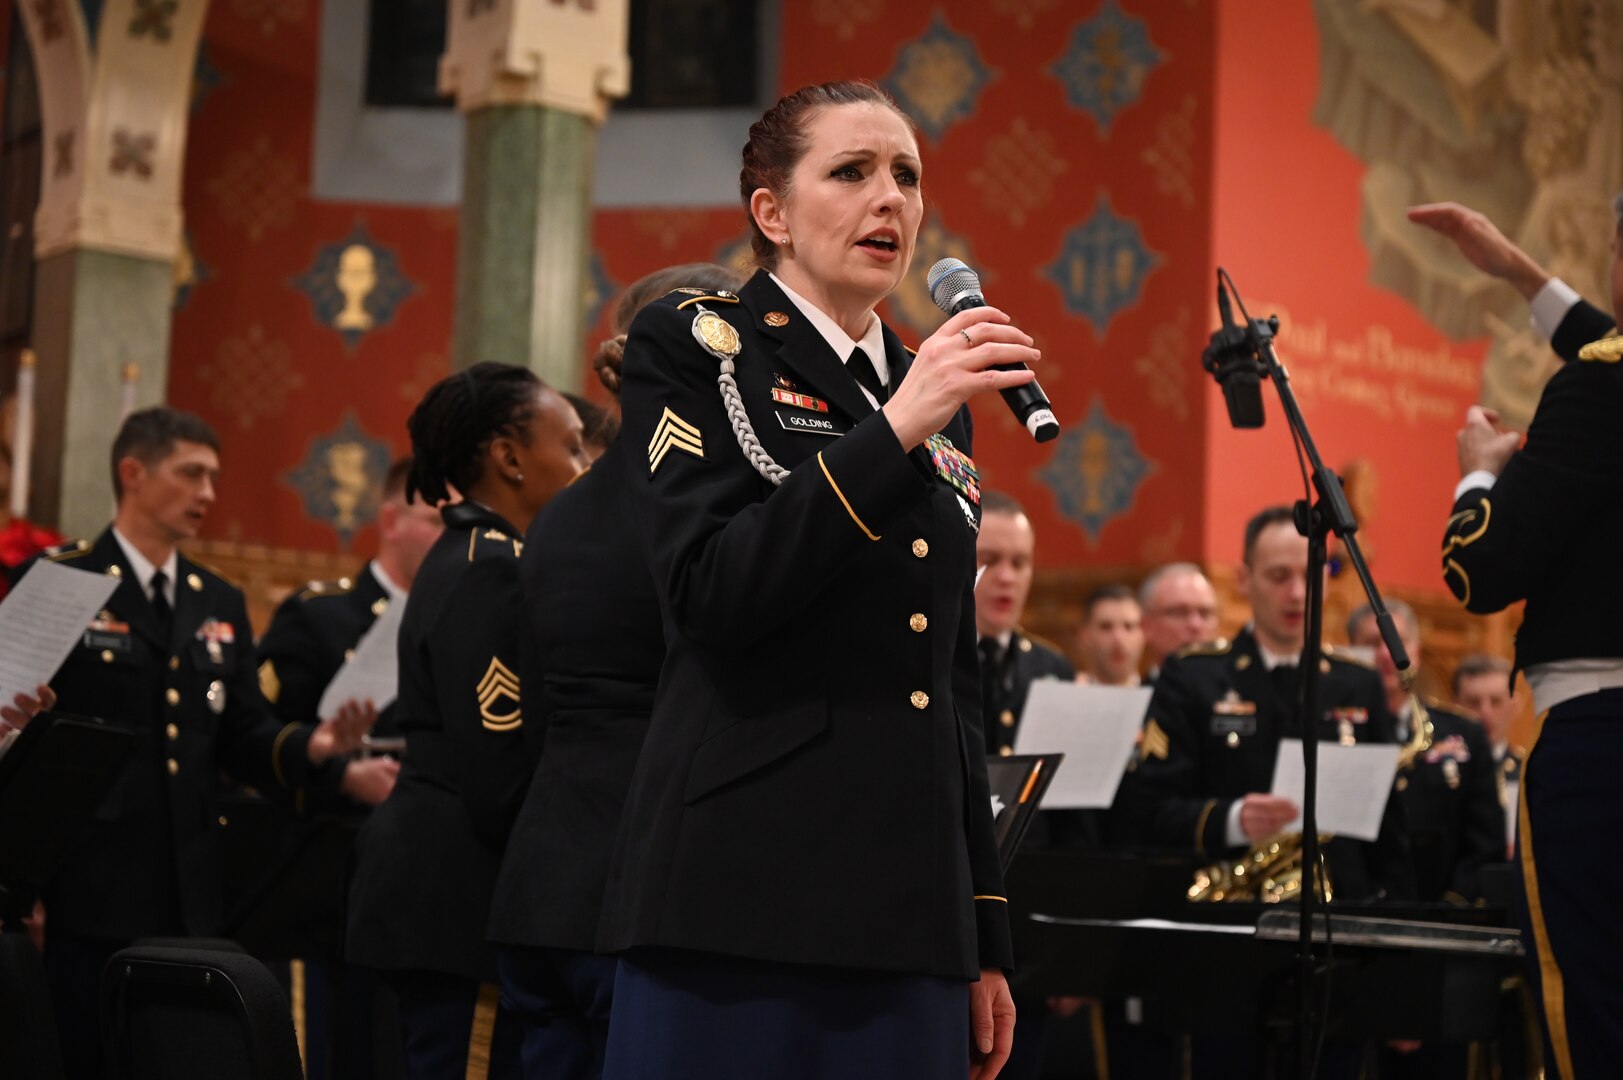 The District of Columbia National Guard’s 257th Army Band holds its annual “Sounds of the Season” holiday concert at Holy Comforter-Saint Cyprian Catholic Church, Dec. 11, 2023. The annual event is part of the band’s commitment to community engagements bolstering music, connection and recruitment throughout the year. (U.S. Air National Guard photo by Master Sgt. Arthur M. Wright)